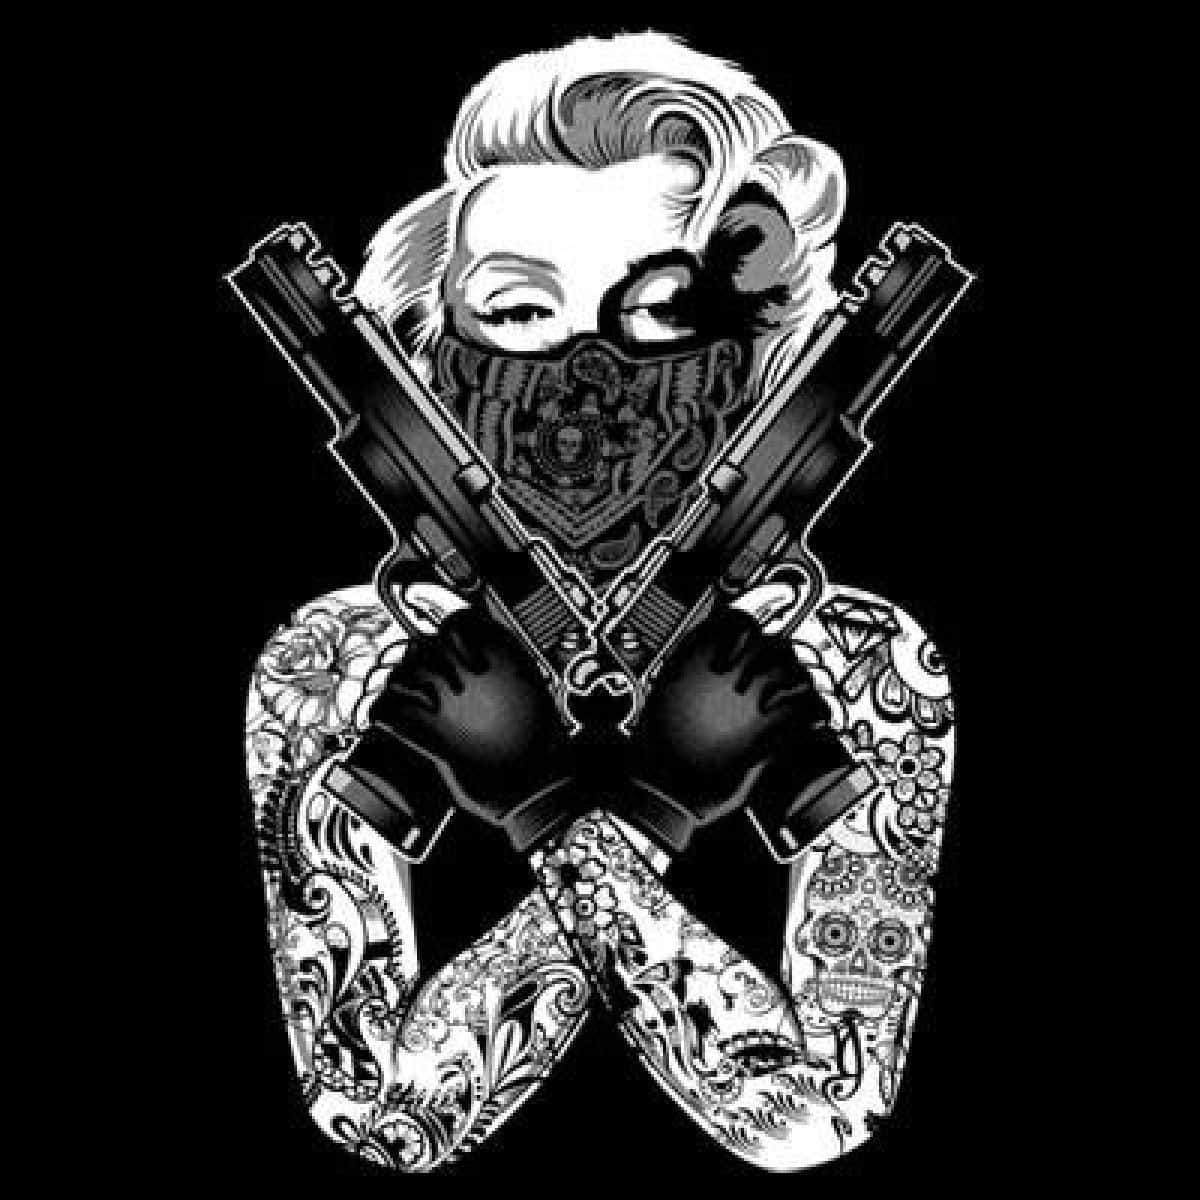 tatted up marilyn monroe wallpaper